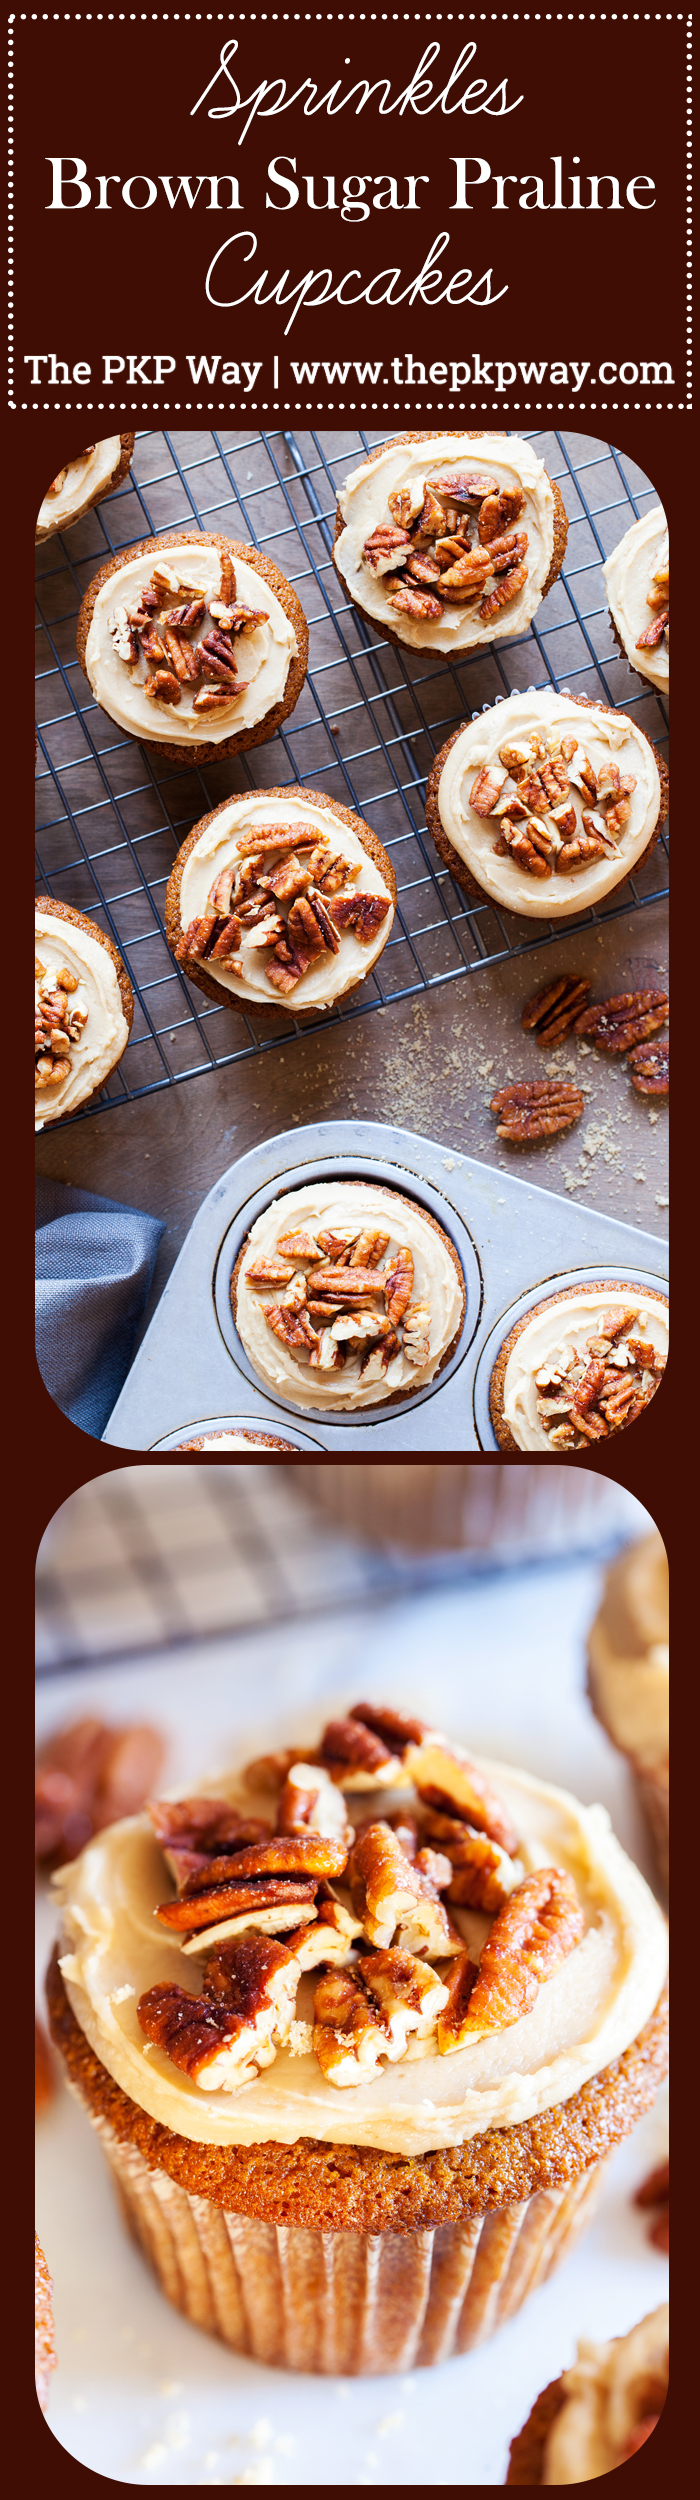 Sprinkles Brown Sugar Praline Cupcakes, directly from Candace Nelson, are incredibly moist, topped with a thick brown sugar frosting, and sprinkled with crunchy candied pecans!